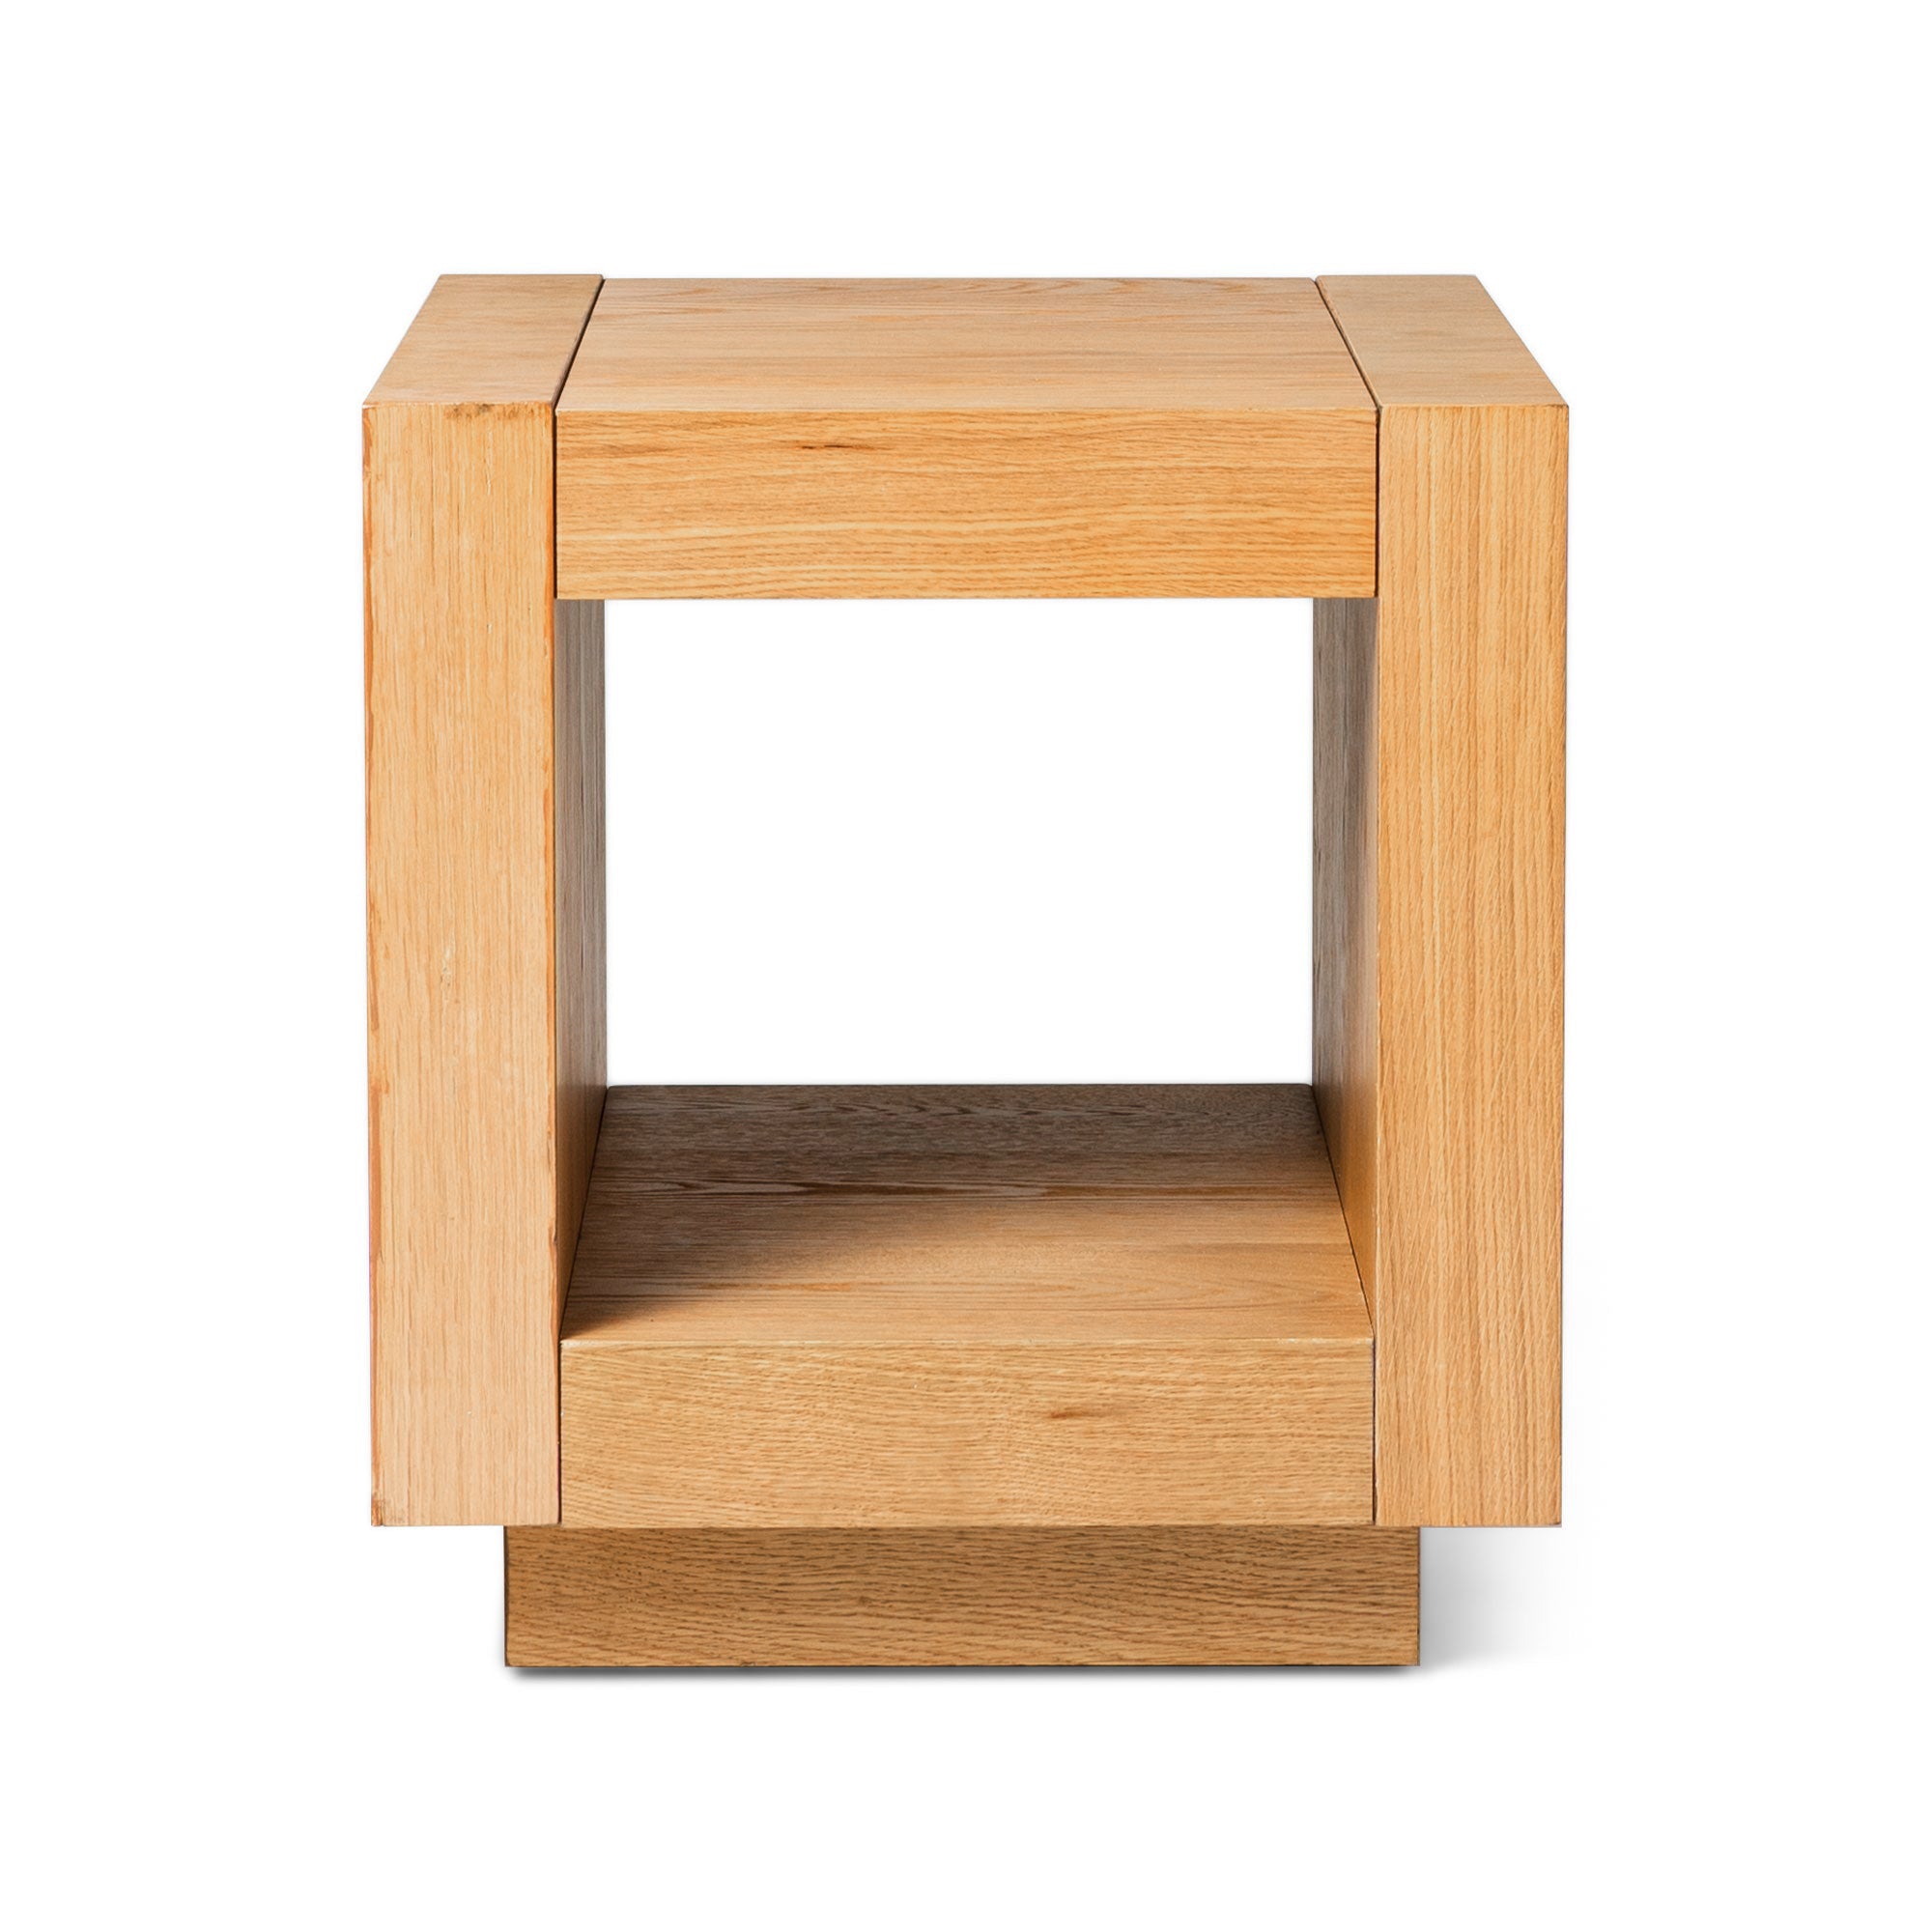 Artemis Contemporary Wooden Side Table in Refined Natural Finish